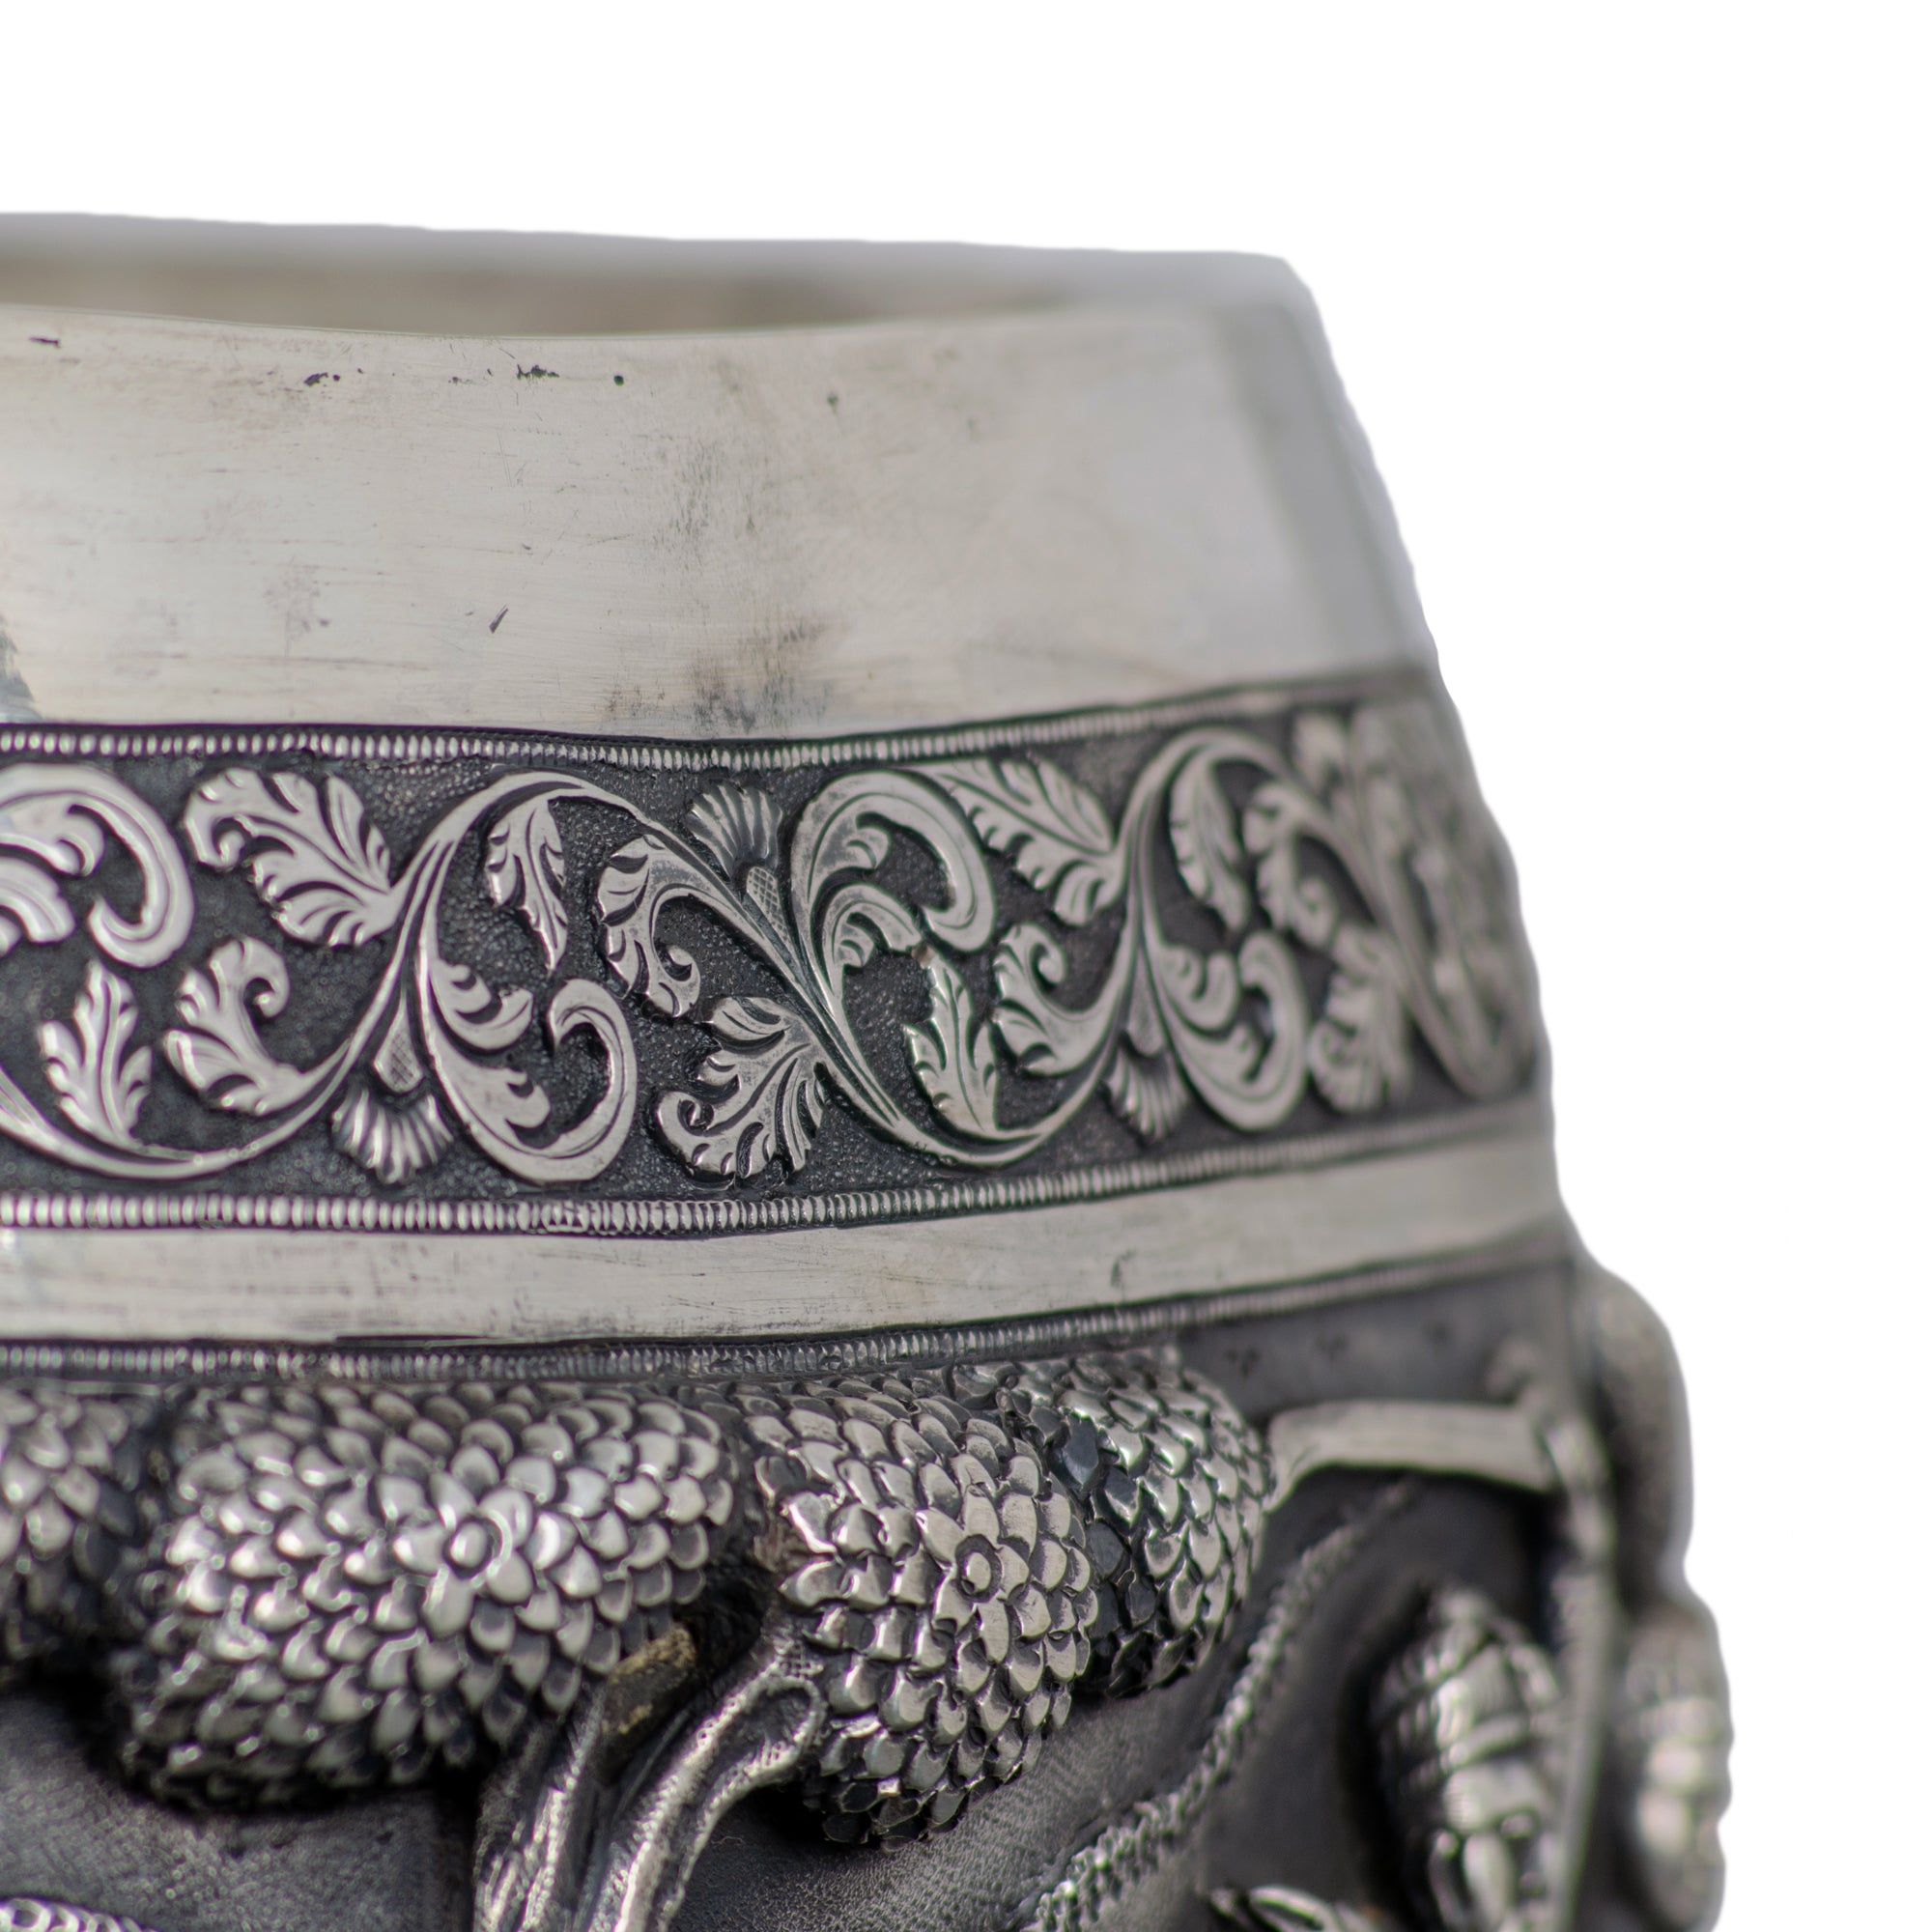 Indian Silver Repoussé Hunting Bowl, Lucknow, 19th Century